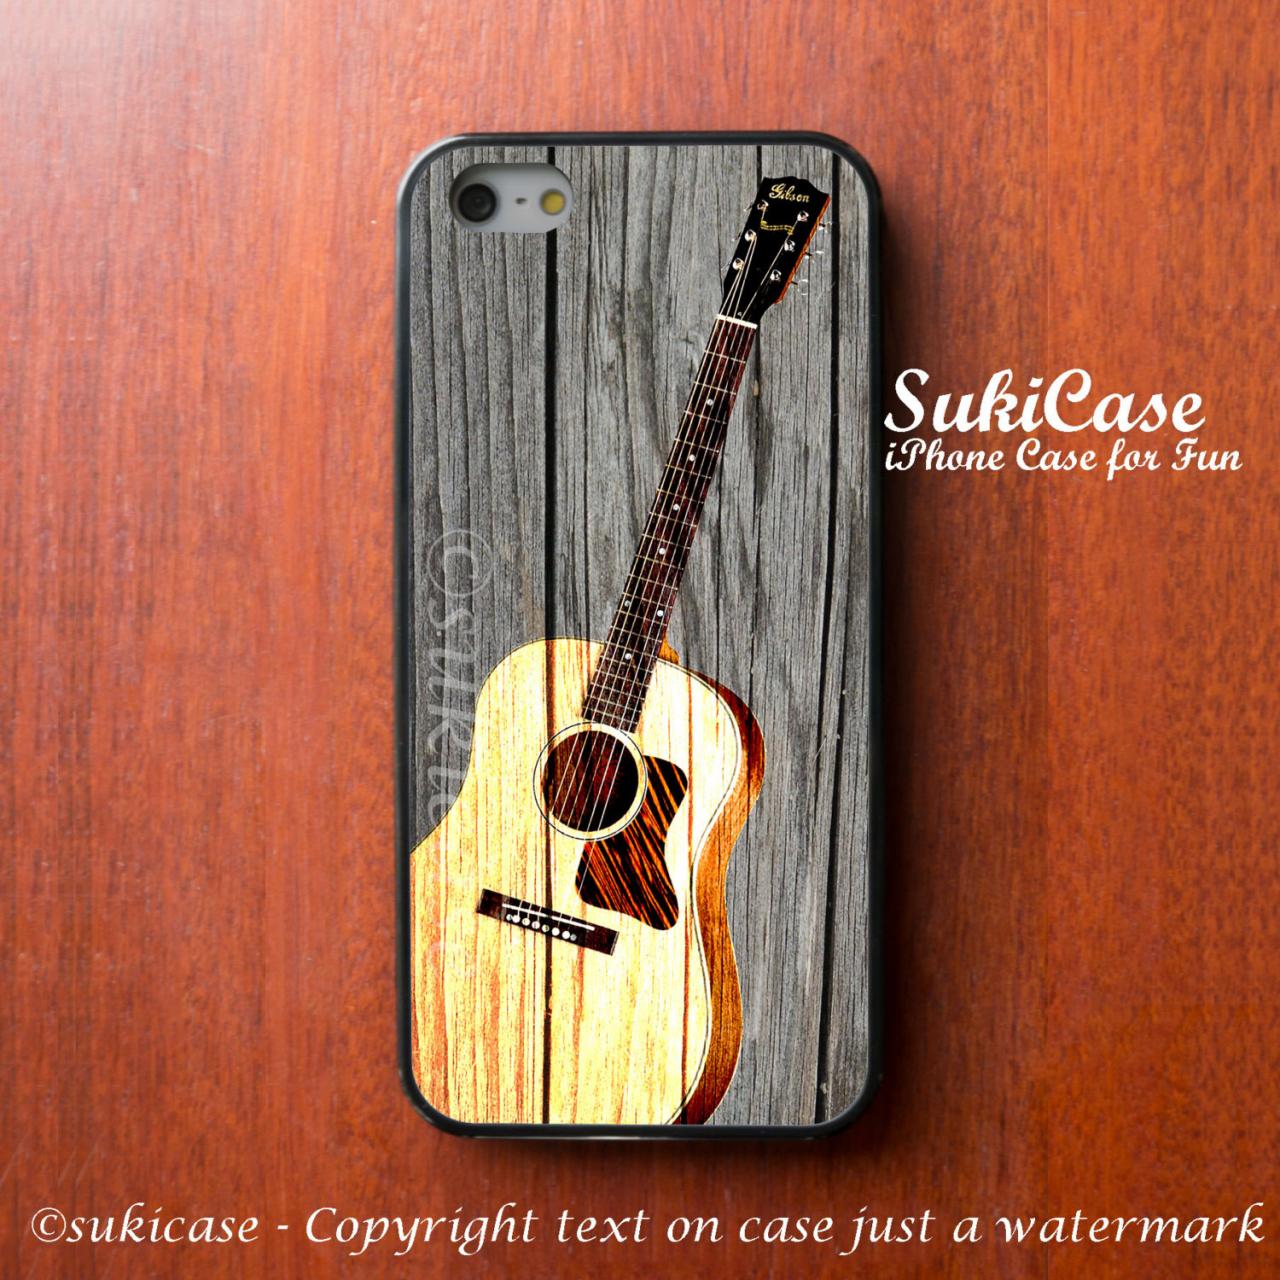 Iphone 5s Case Wooden Guitar Musical Instrument Wood Iphone 5 Case Iphone 4 Case Samsung Galaxy S4 S3 Cover Iphone 5c Cases Iphone 4s Case